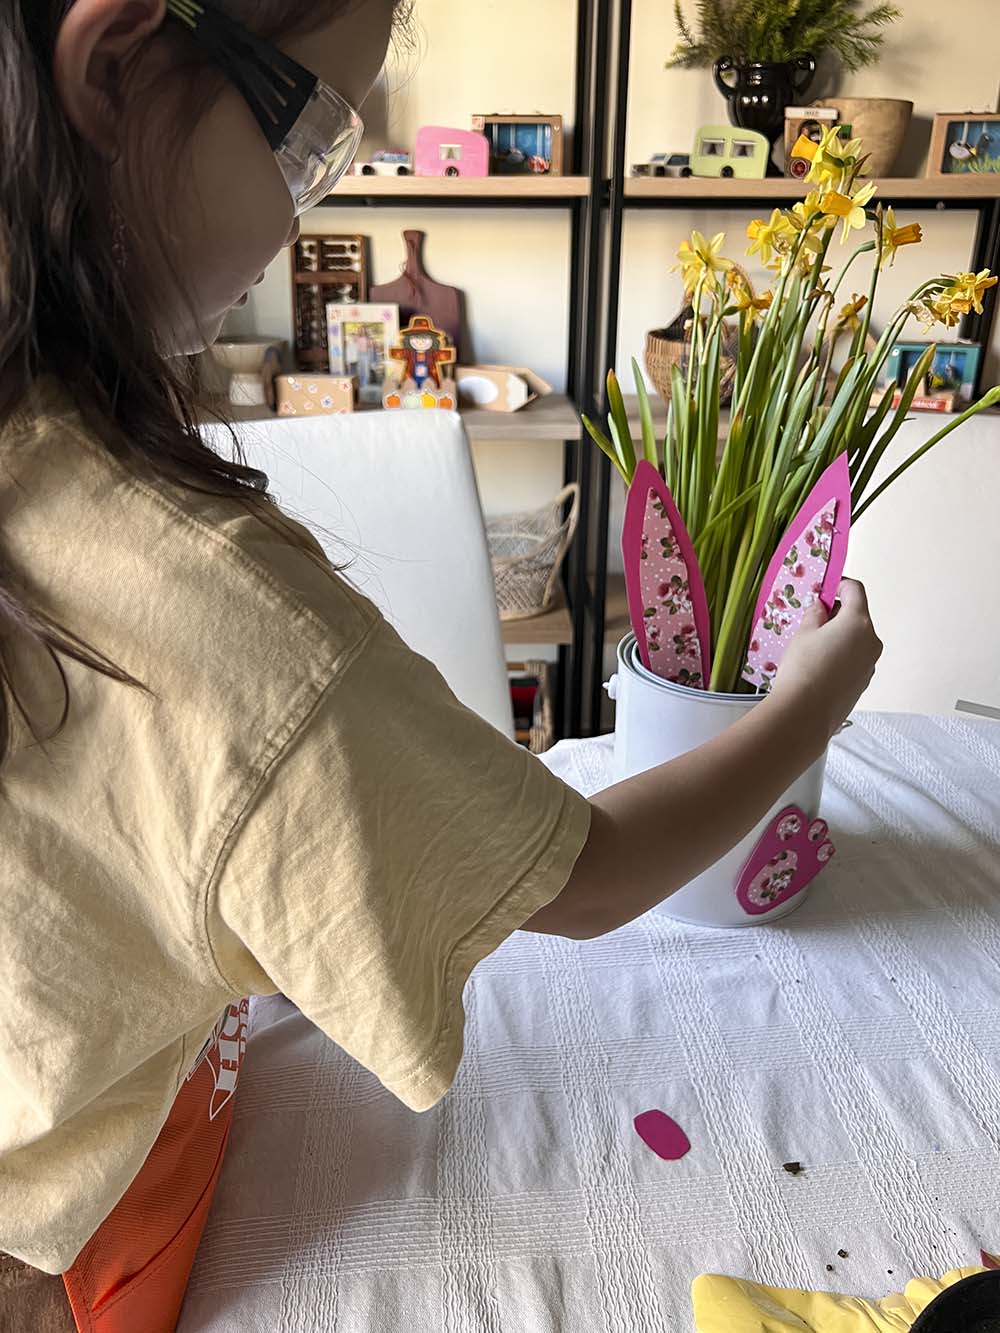 Girl placing paper bunny ears in paint bucket with flowers.